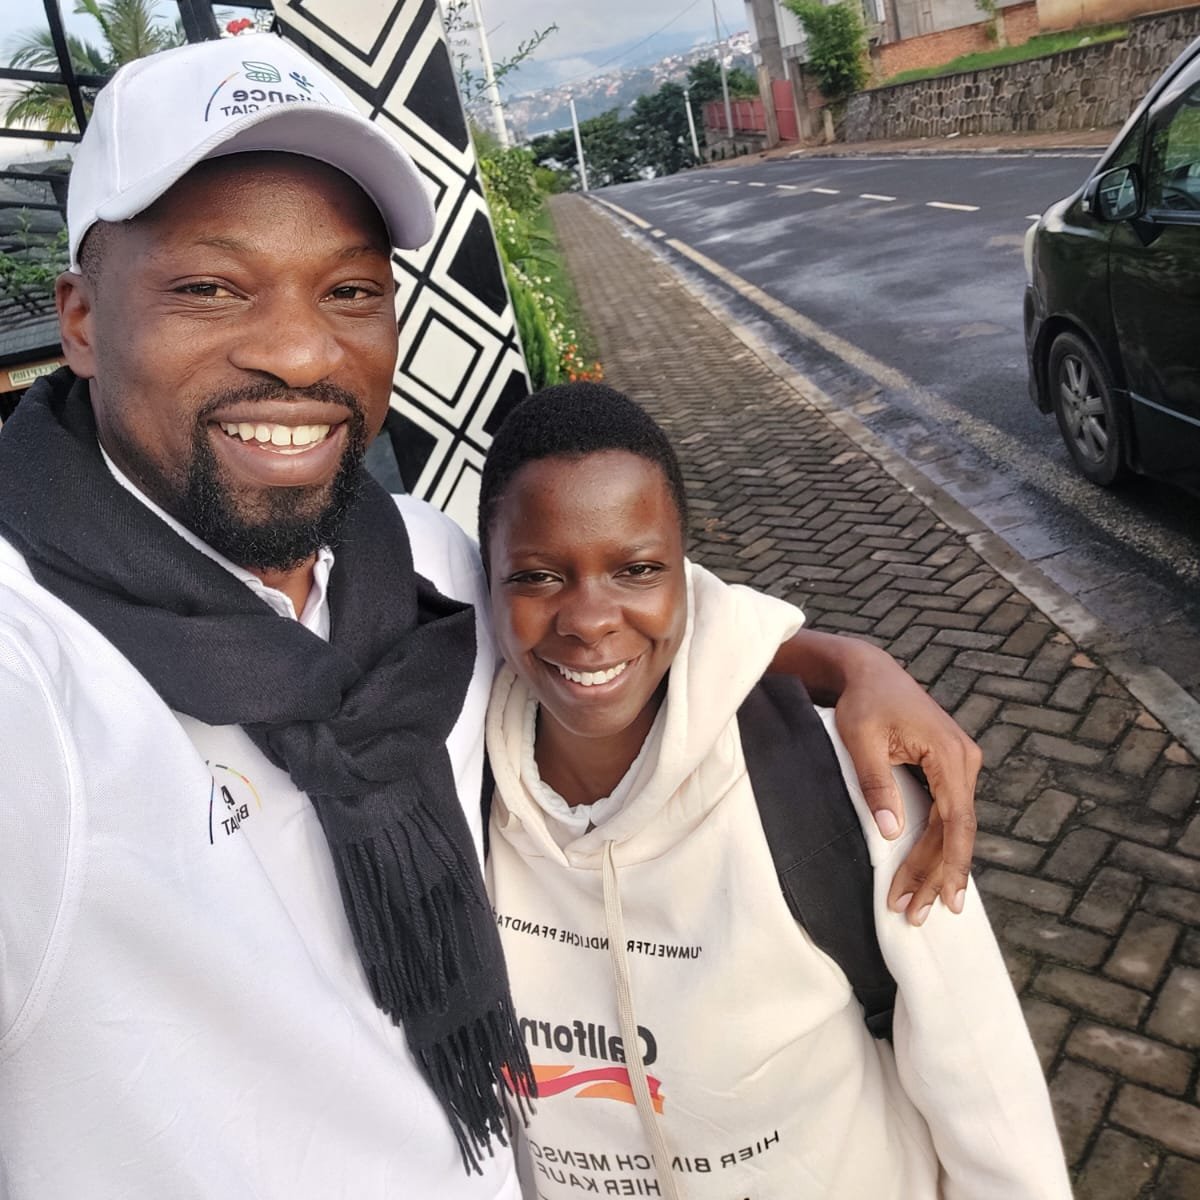 Excited to meet fellow #TAGDev alumni, @InyanjiEileen, in Rwanda! Both beneficiaries of the transformative @ruforumsec TAGDev program, now at @BiovIntCIAT_eng. TAGDev's success shines through our journeys, and CIAT's openness to young talent is a testament to the program's impact